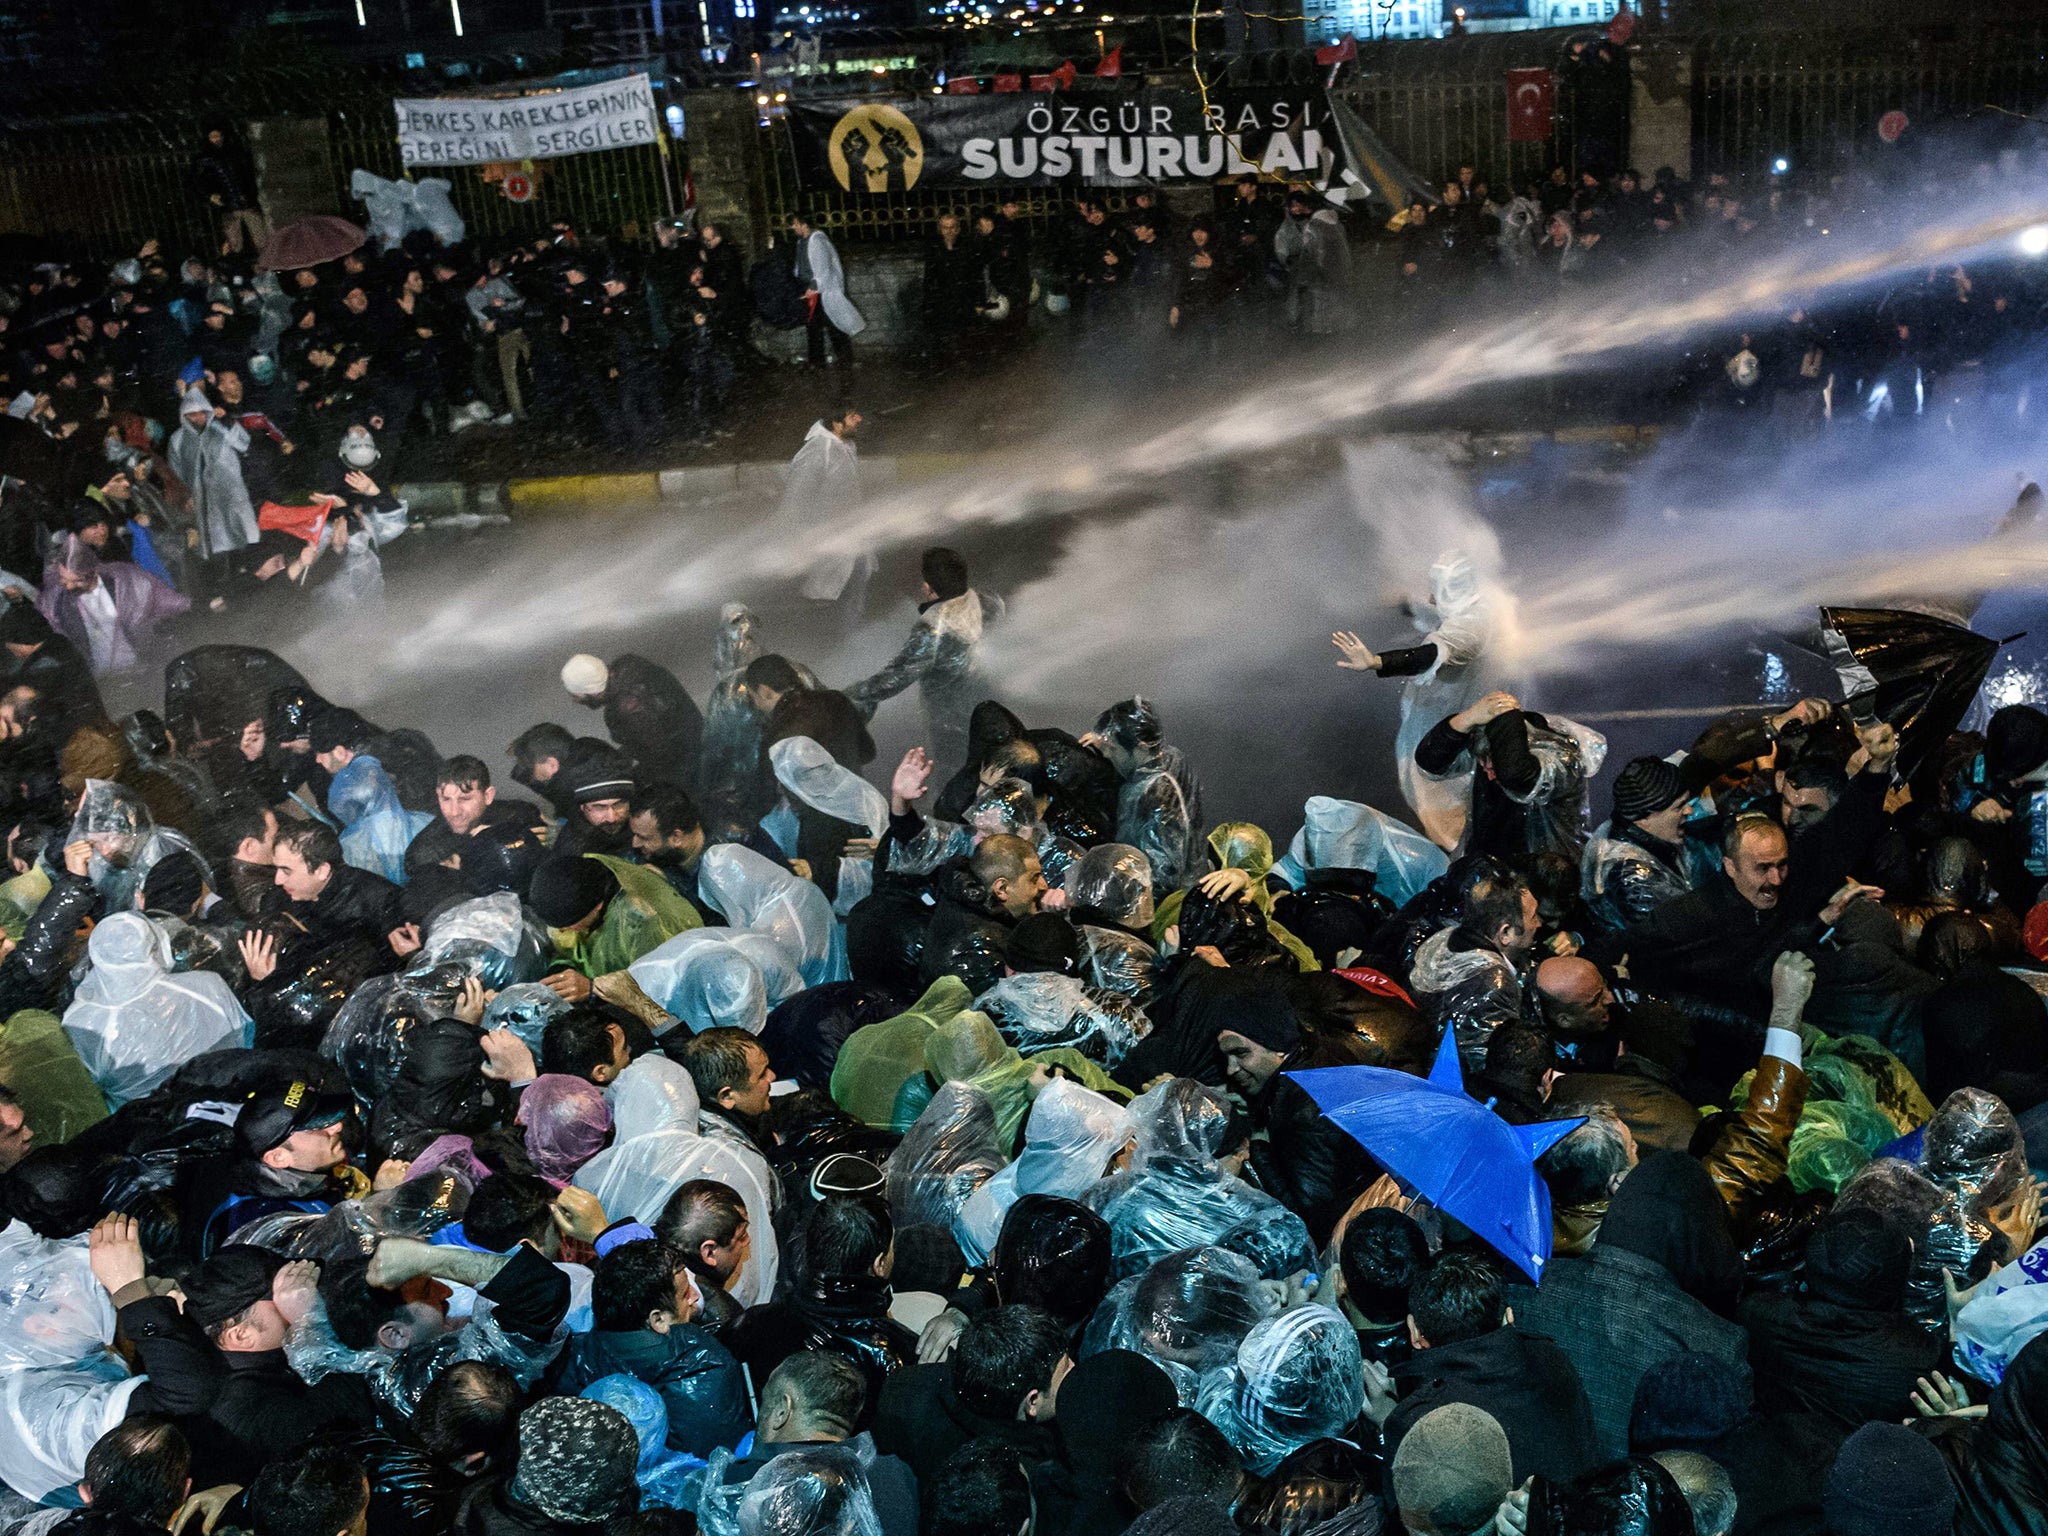 Turkish riot police use water cannon and tear gas to disperse supporters at Zaman daily newspaper headquarters in Istanbul. An Istanbul court ordered into administration a Turkish Zaman daily newspaper that is sharply critical of President Recep Tayyip Erdogan, amid growing alarm over freedom of expression in the country